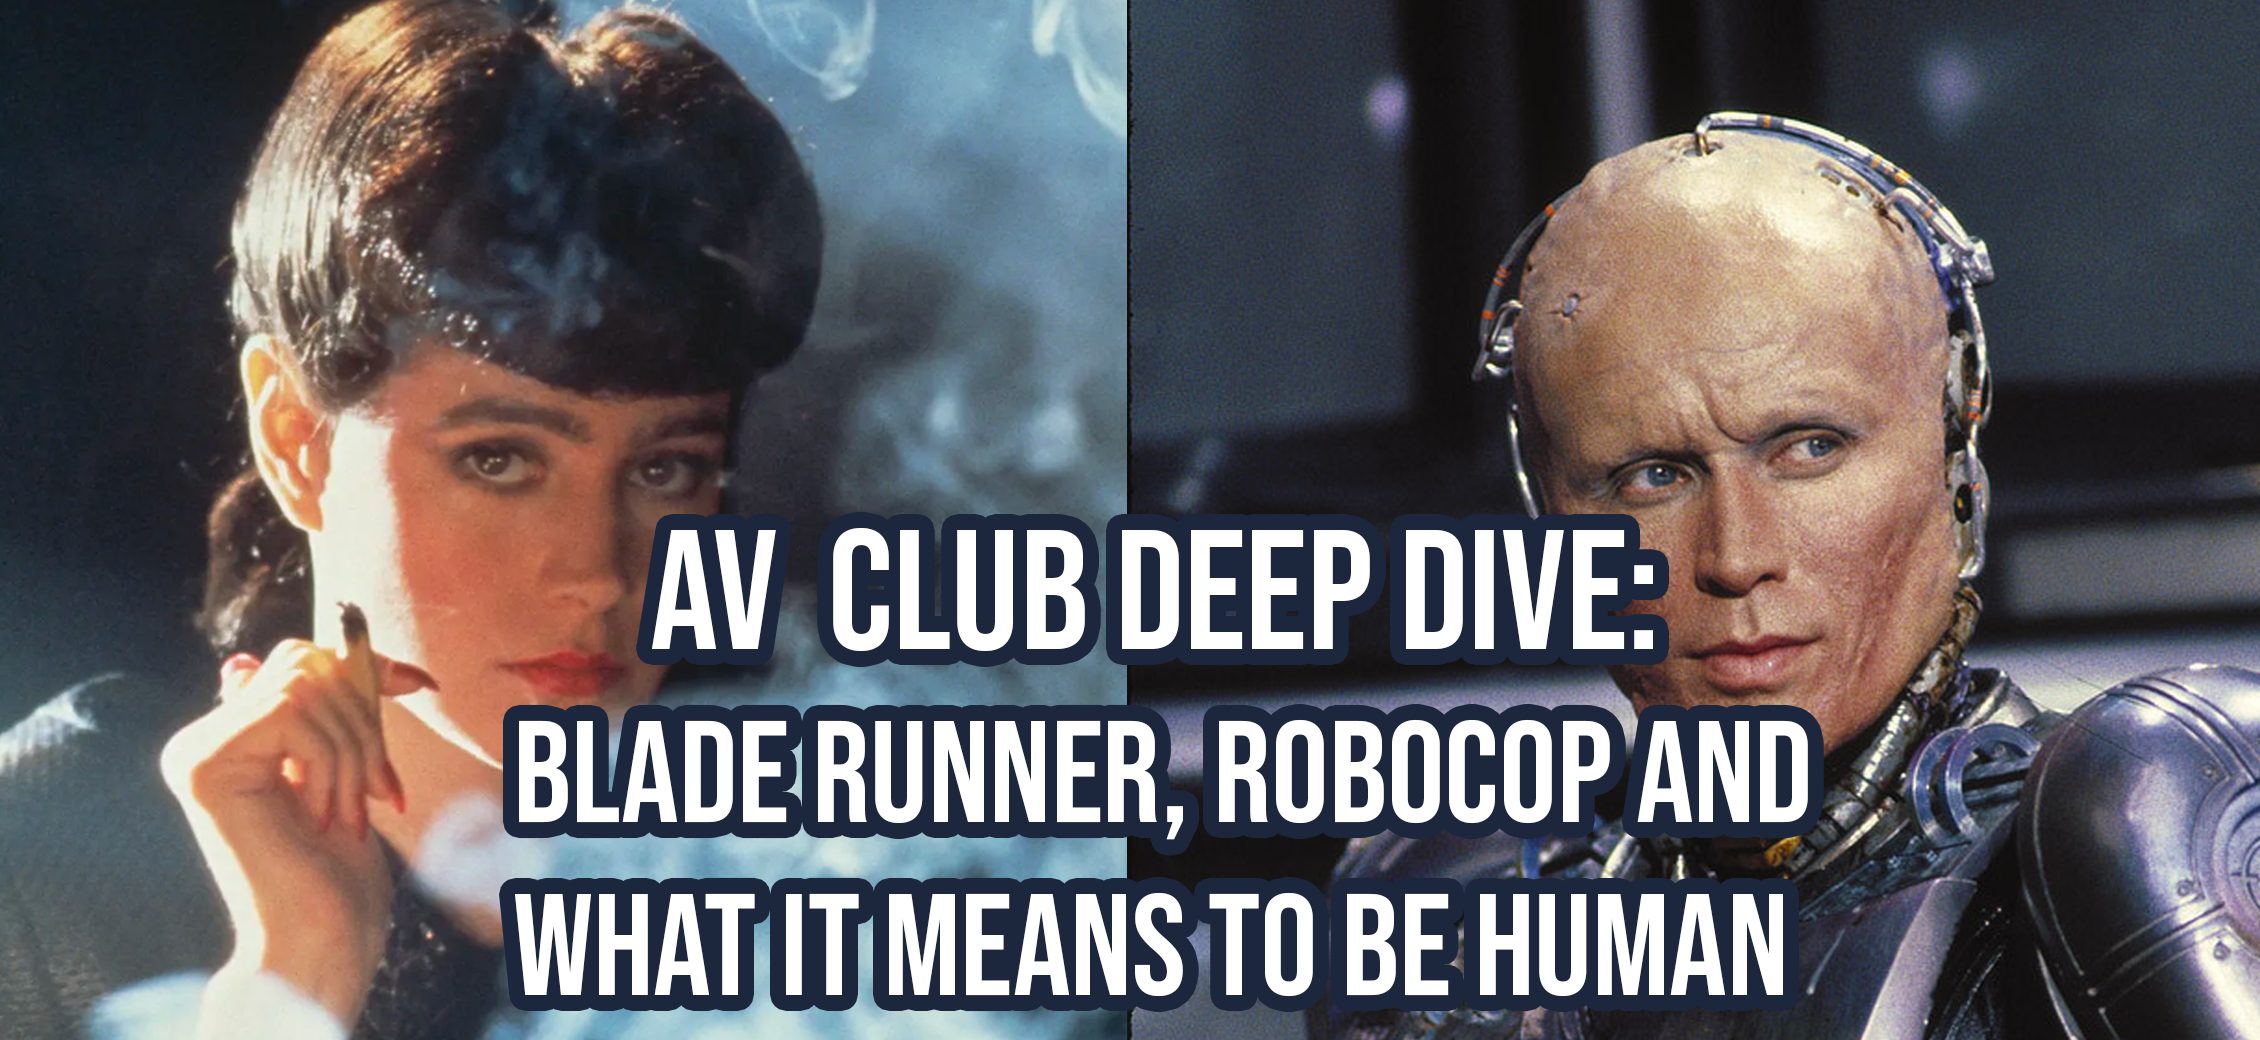 AV Club Deep Dive: Blade Runner, Robocop, and what it means to be human